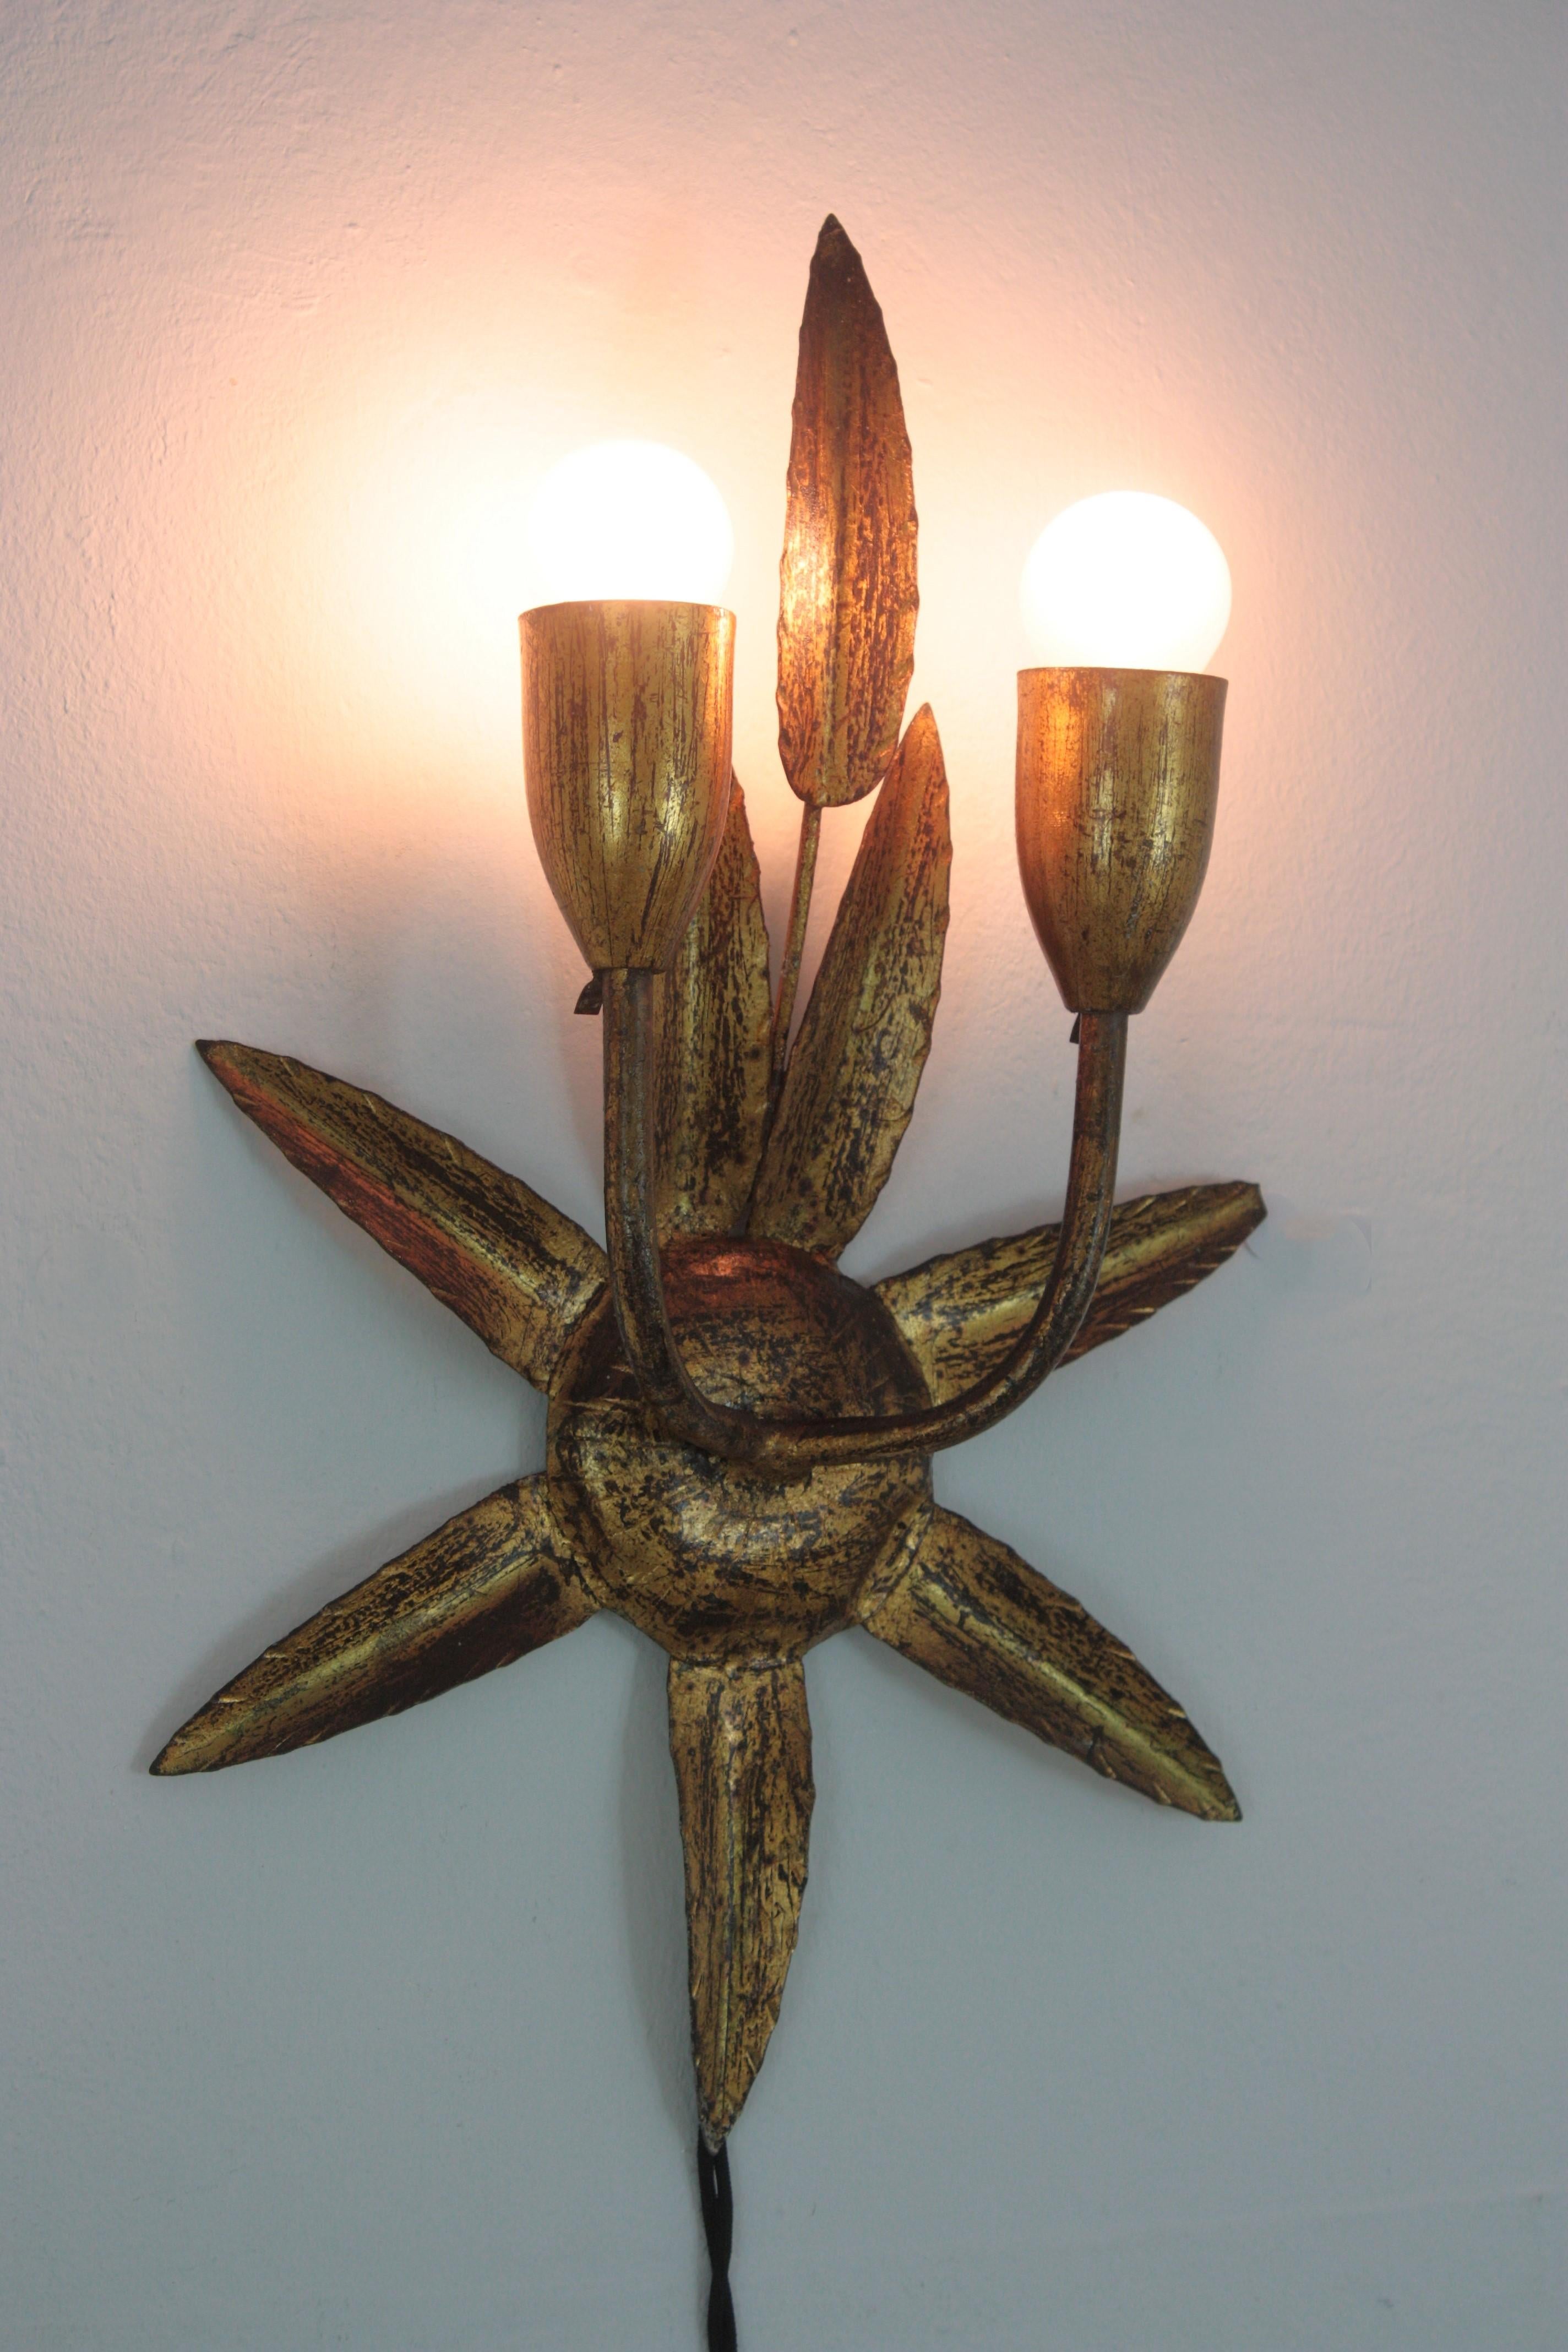 Spanish Gilt Iron Wall Sconce with Foliage Design and Starburst Backplate, 1950s For Sale 2